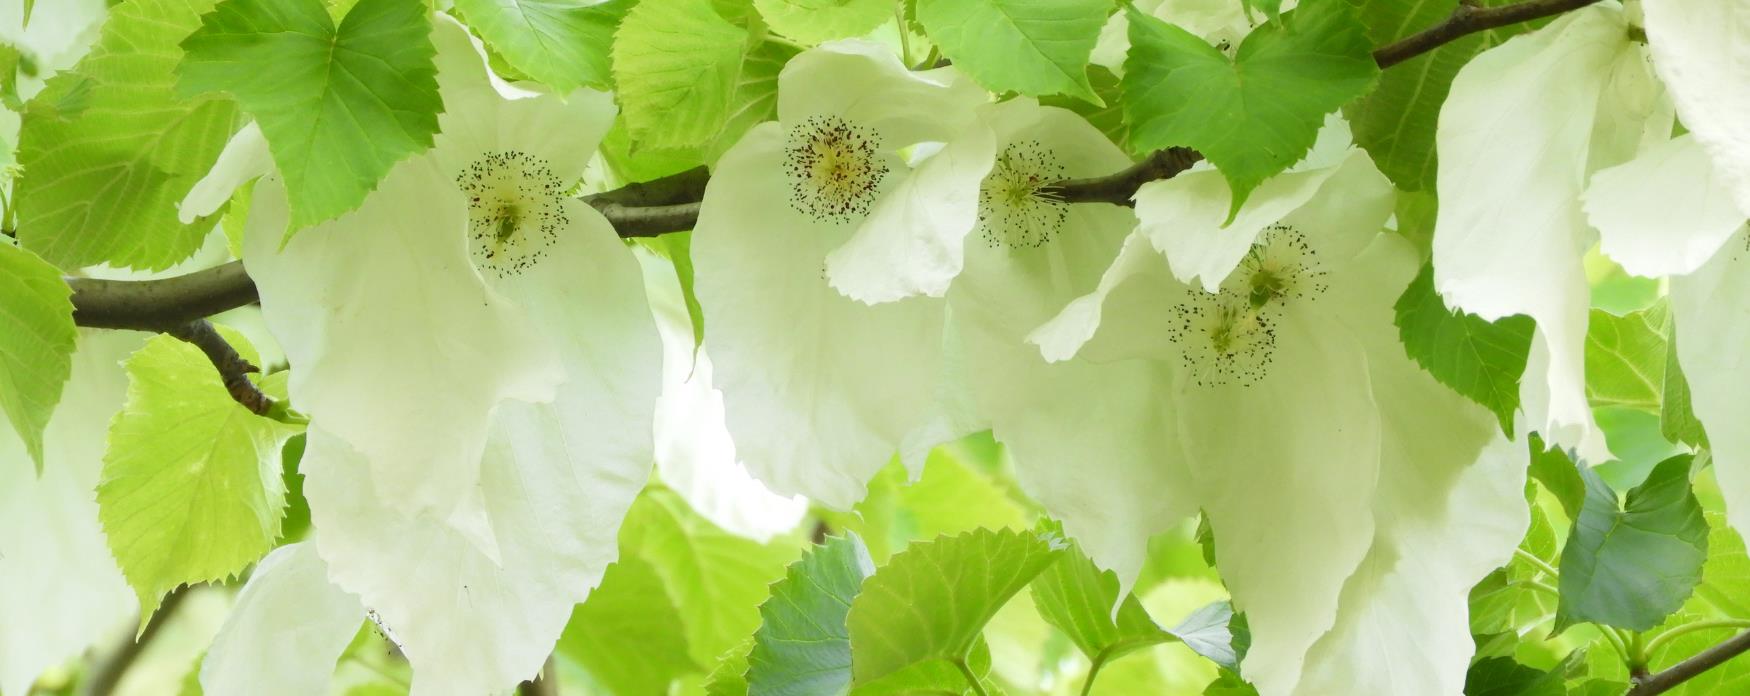 Branch of Handkerchief tree with beautiful hanging white flowers